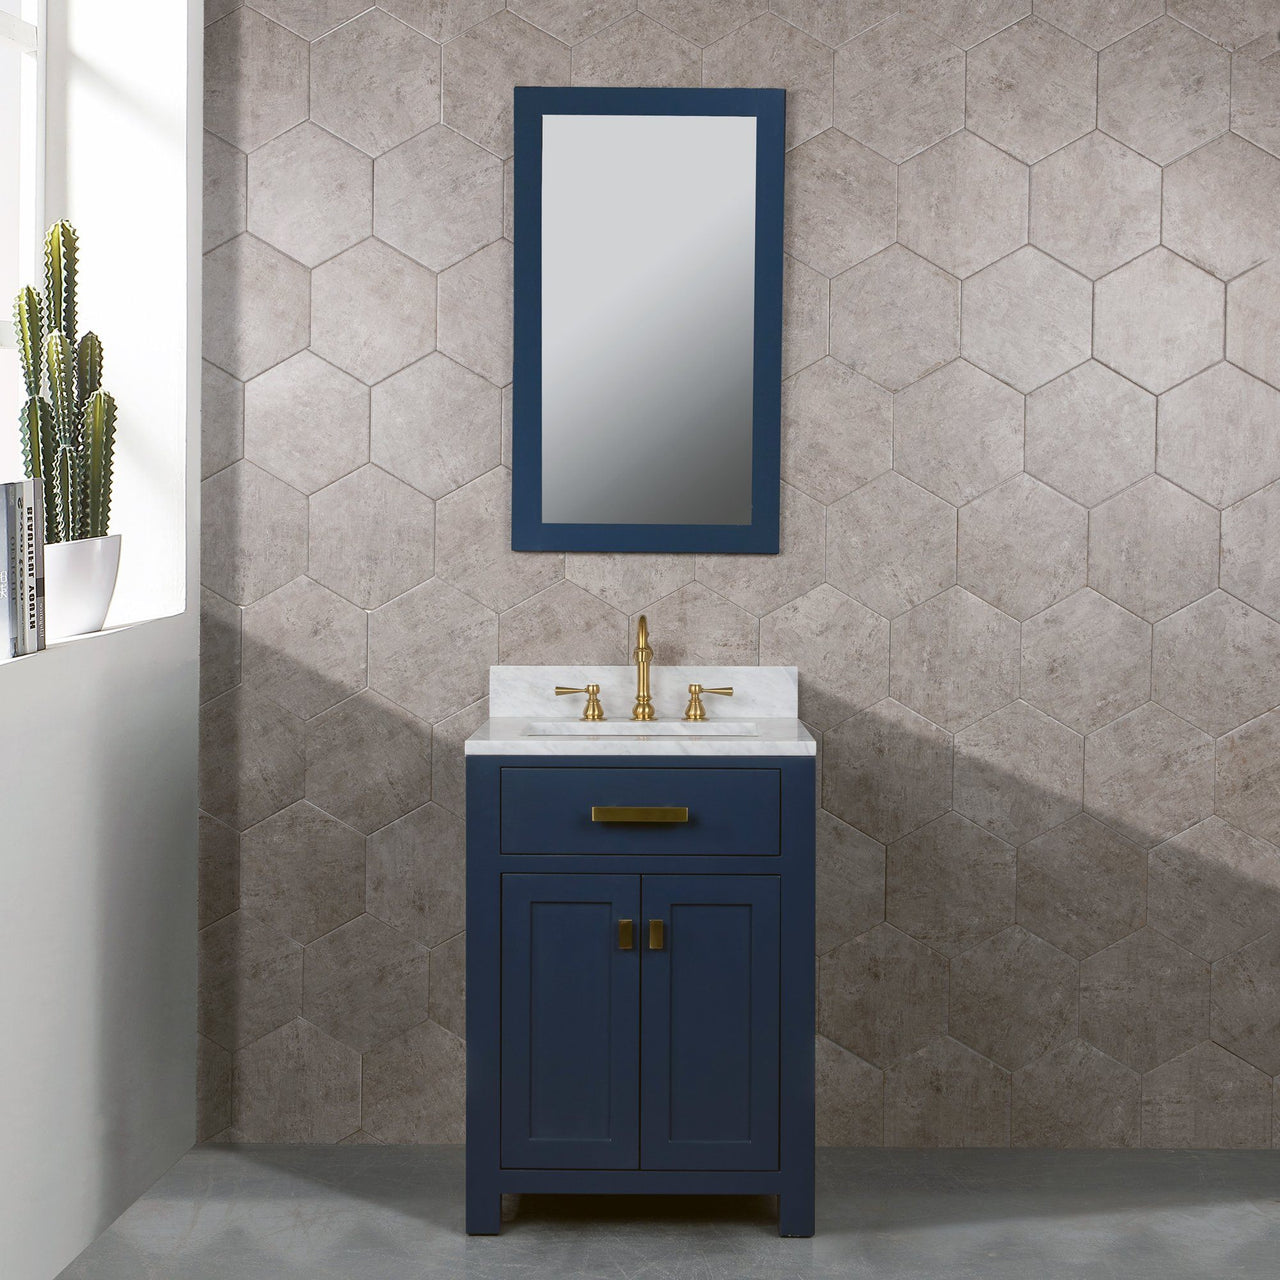 Madison 24-Inch Single Sink Carrara White Marble Vanity In Monarch Blue With Matching Mirror and F2-0012-06-TL Lavatory Faucet Vanity Water Creation 